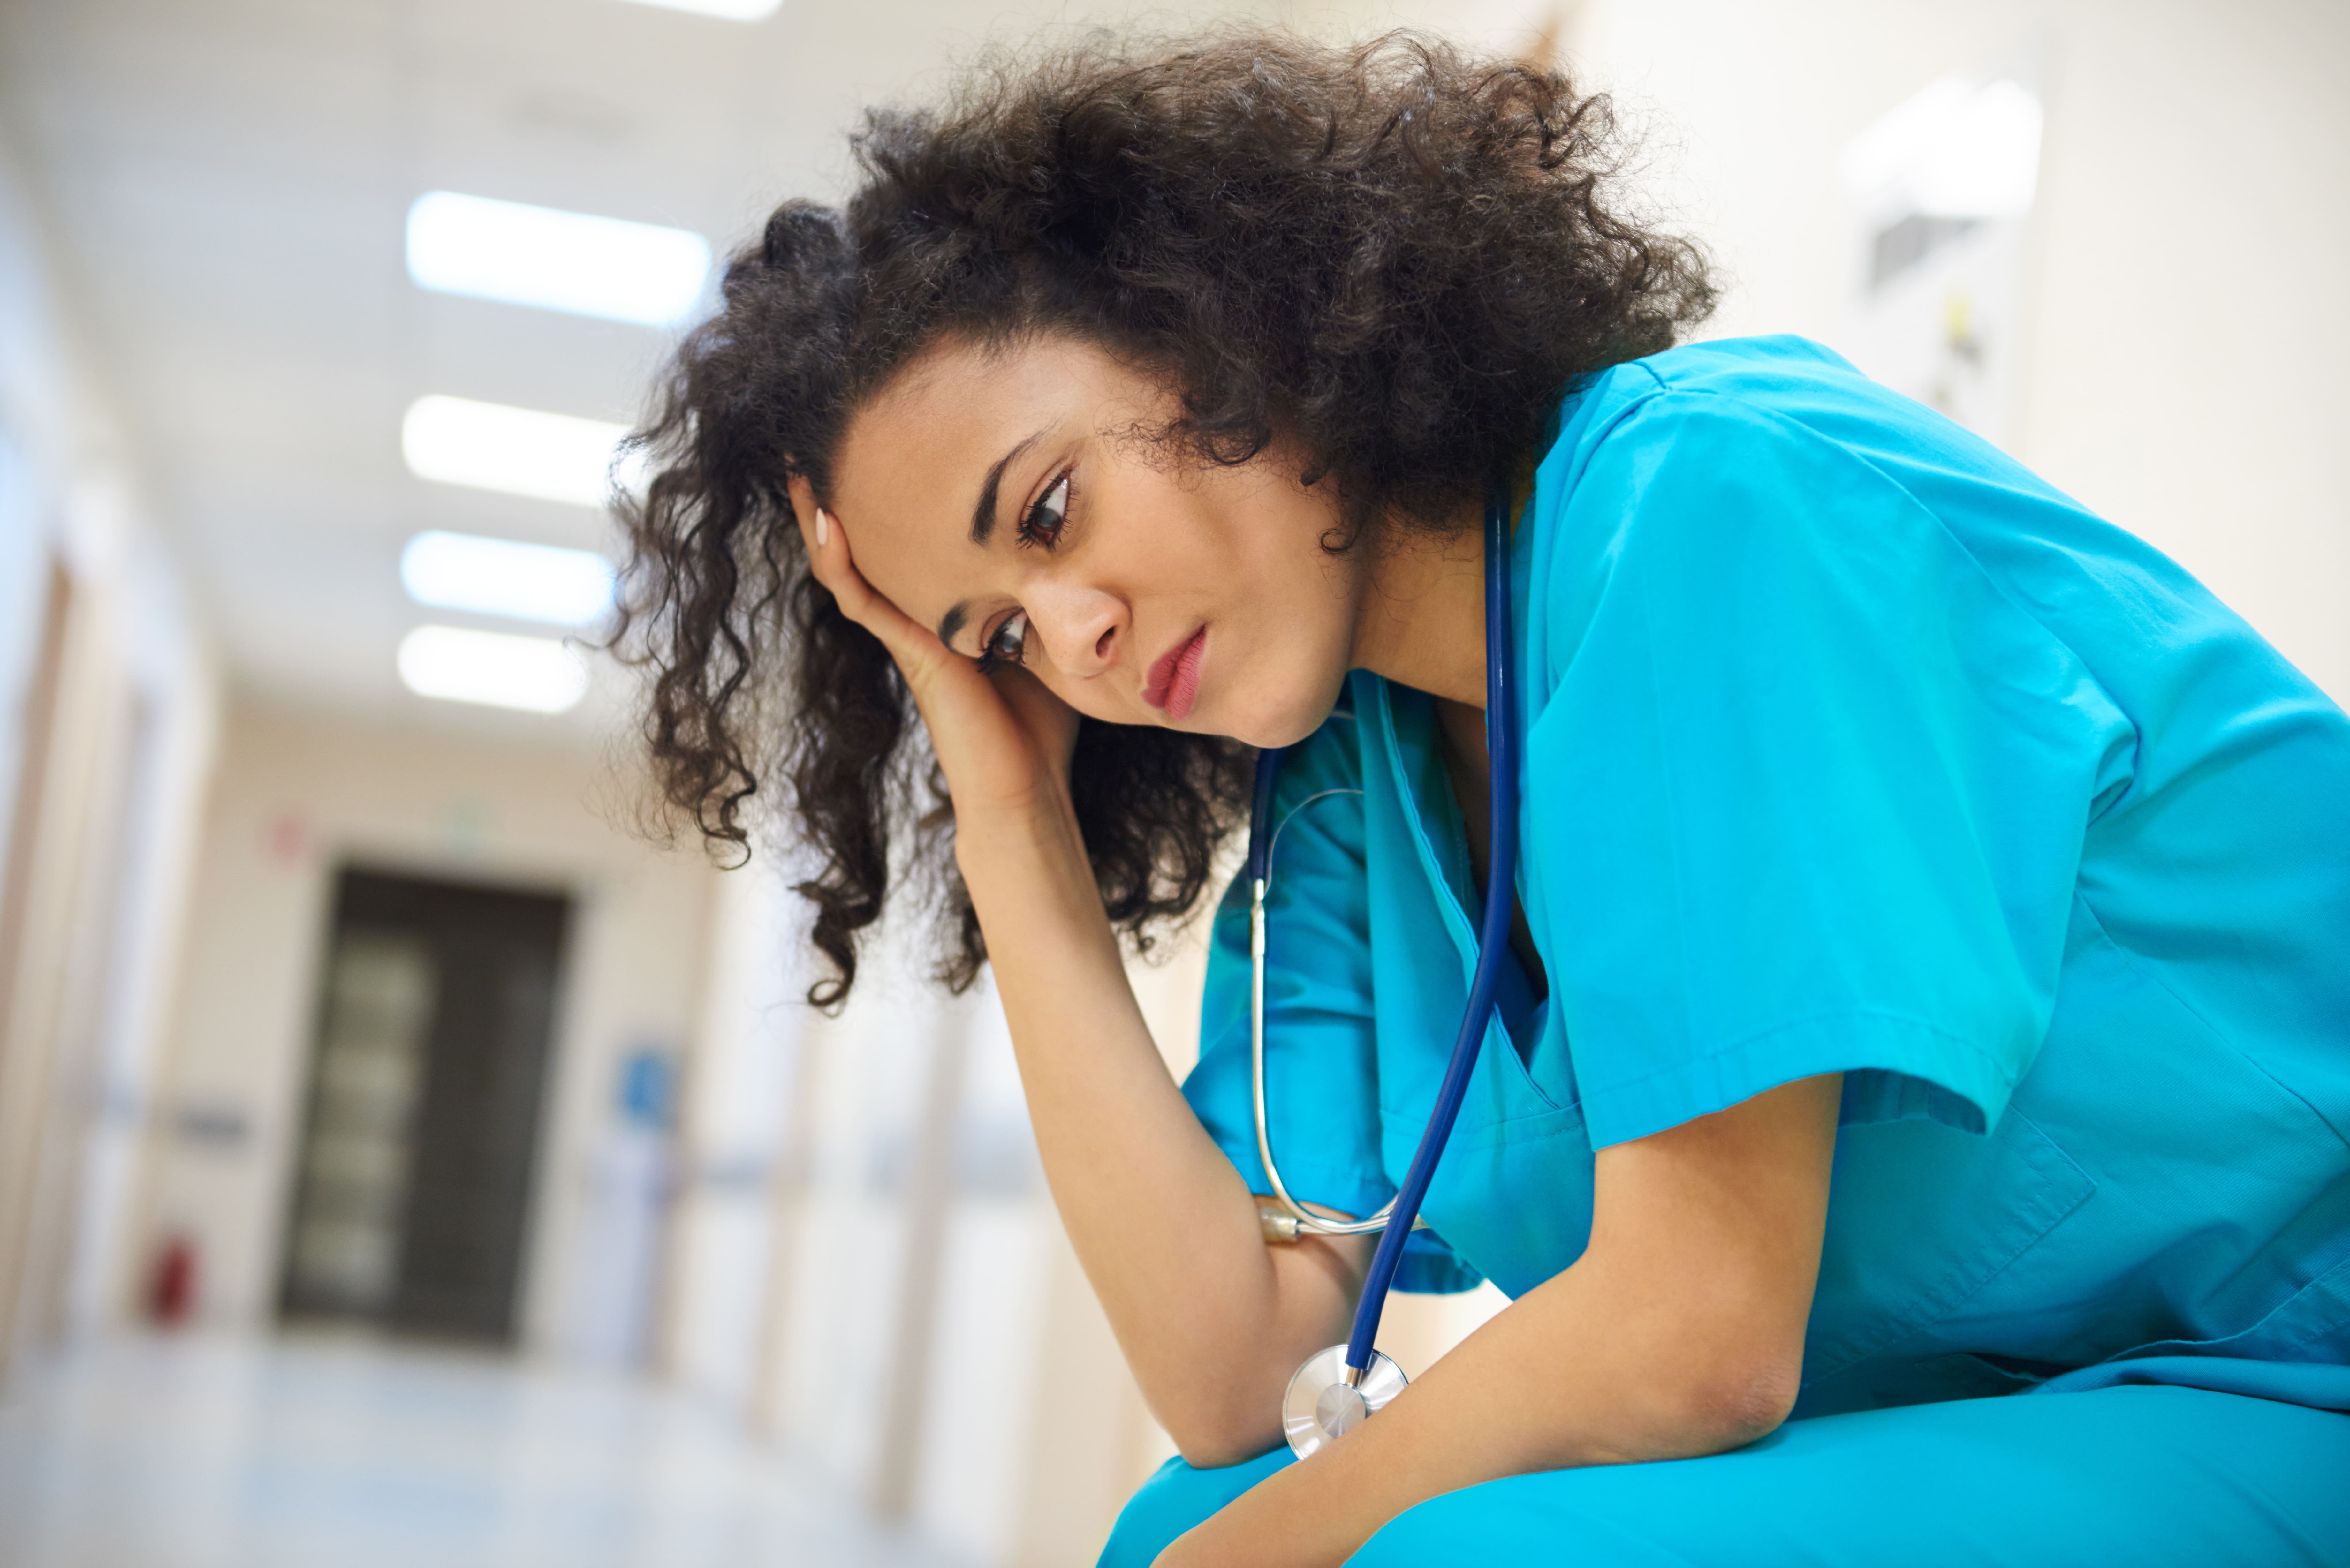 Physician Burnout � A Growing Medical Crisis in the USA